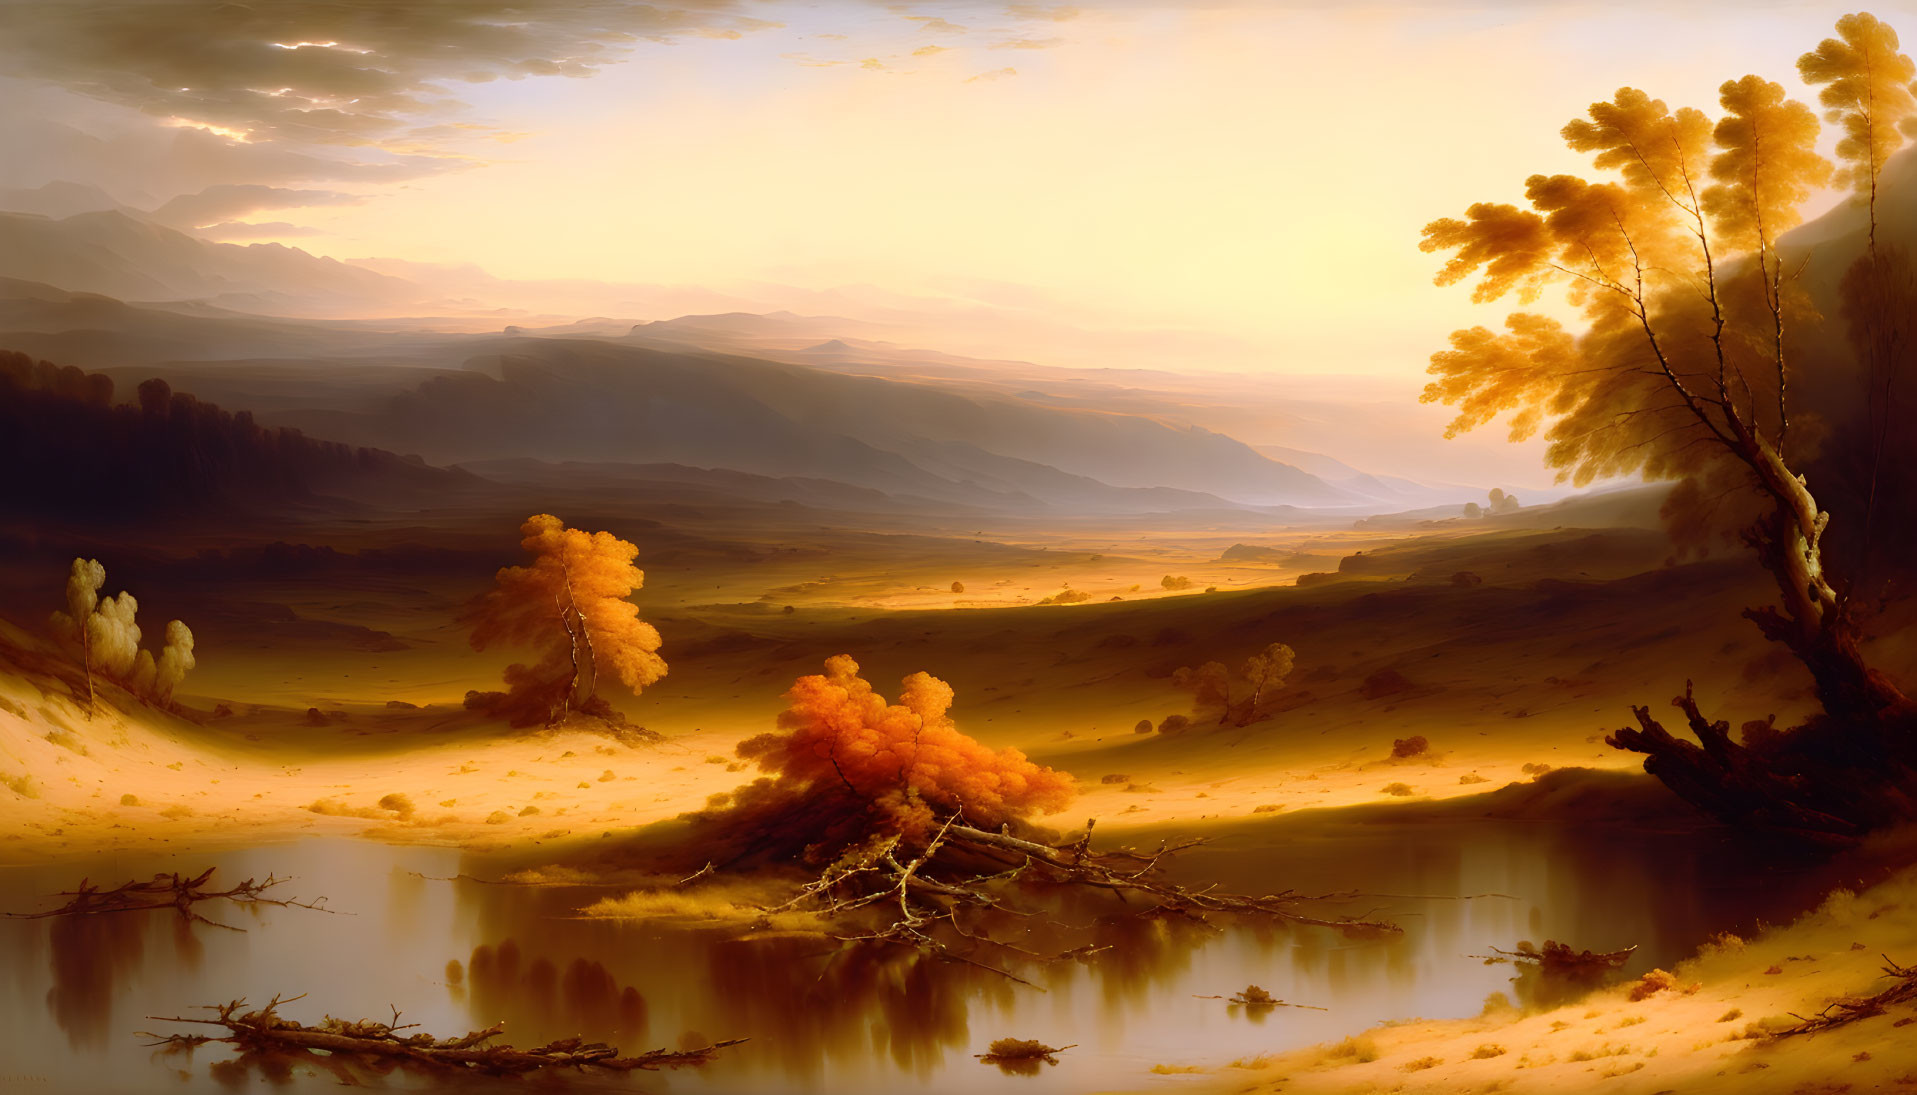 Tranquil landscape with golden sunlight, serene river, rolling hills, autumn trees.